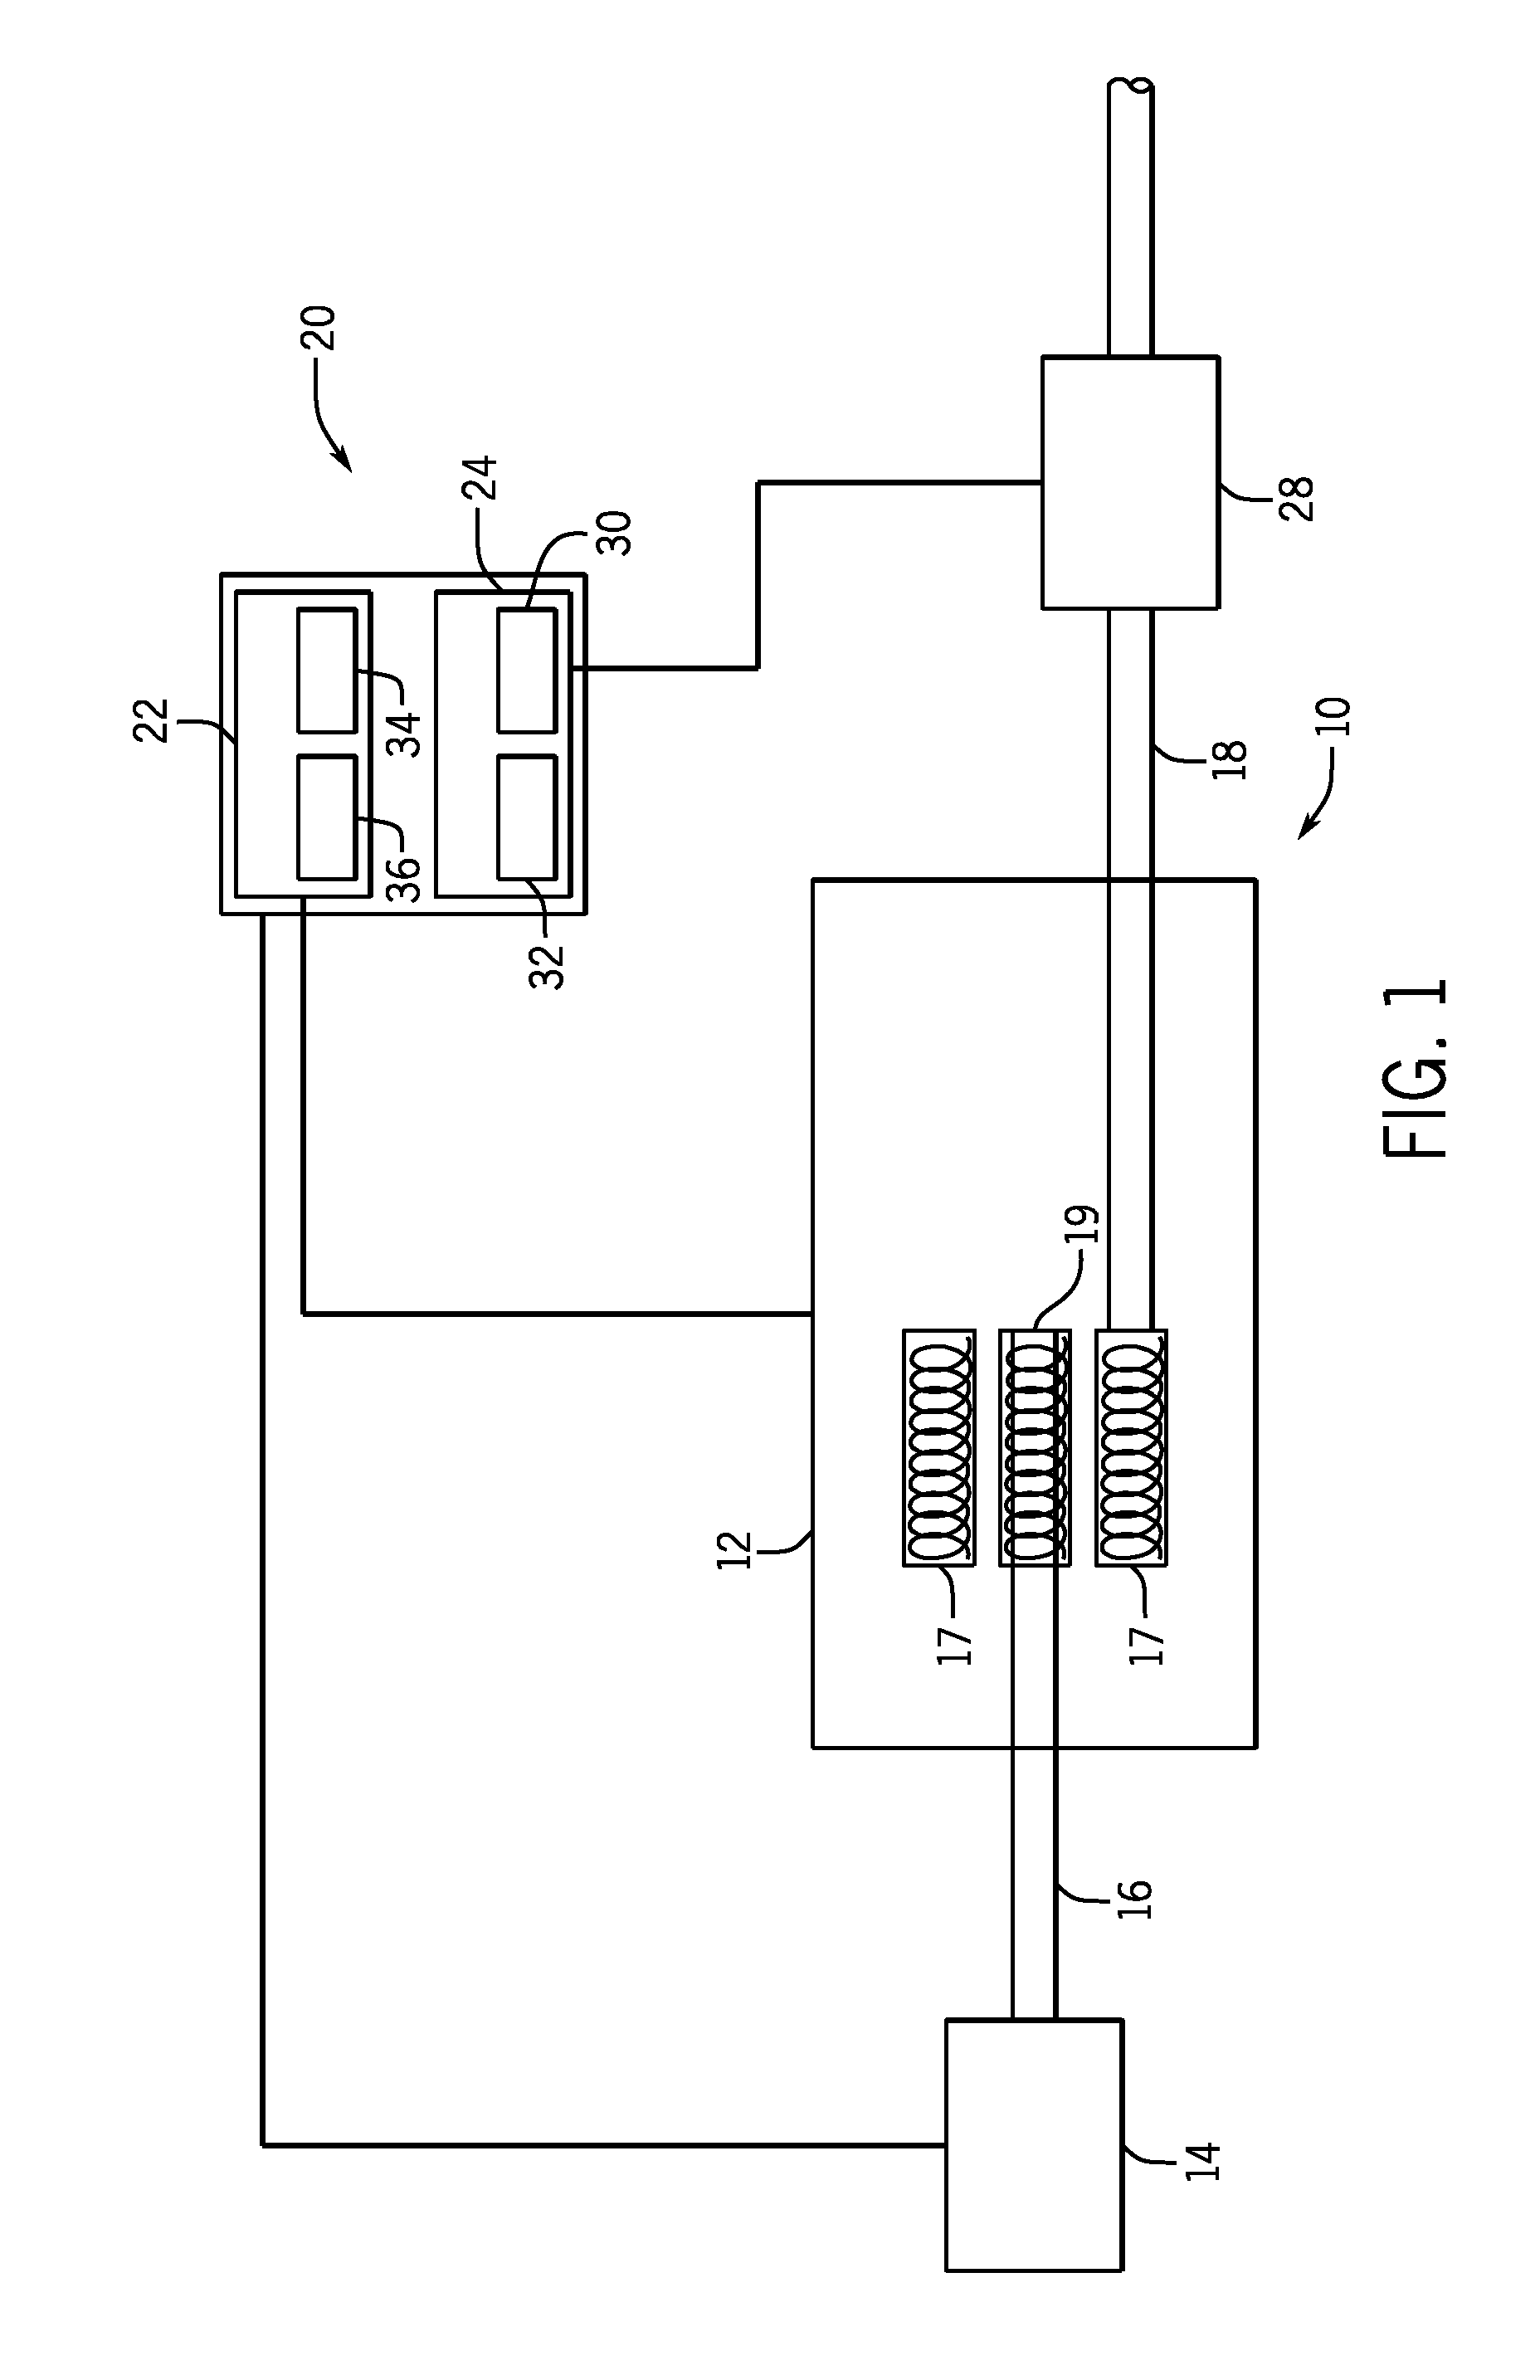 System and Method for a Capacitive Voltage Sensor System